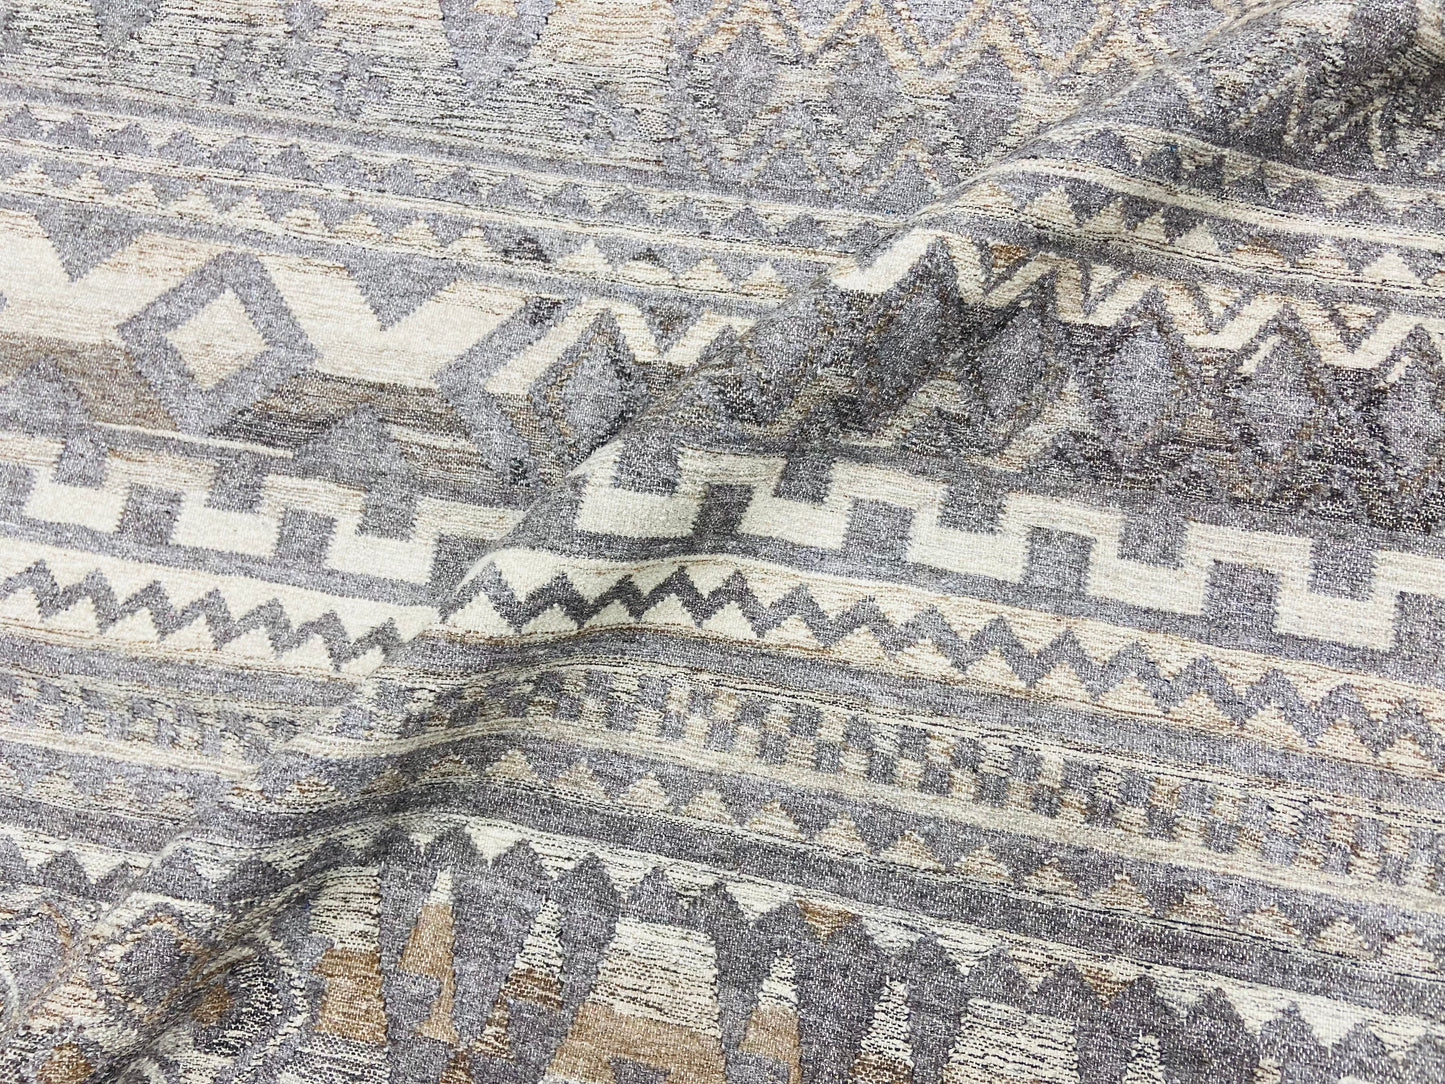 Get trendy with Ivory Silk Scandinavian Kilim 6.4x8.2ft 193x279Cms - Kilims available at Jaipur Oriental Rugs. Grab yours for $235.00 today!